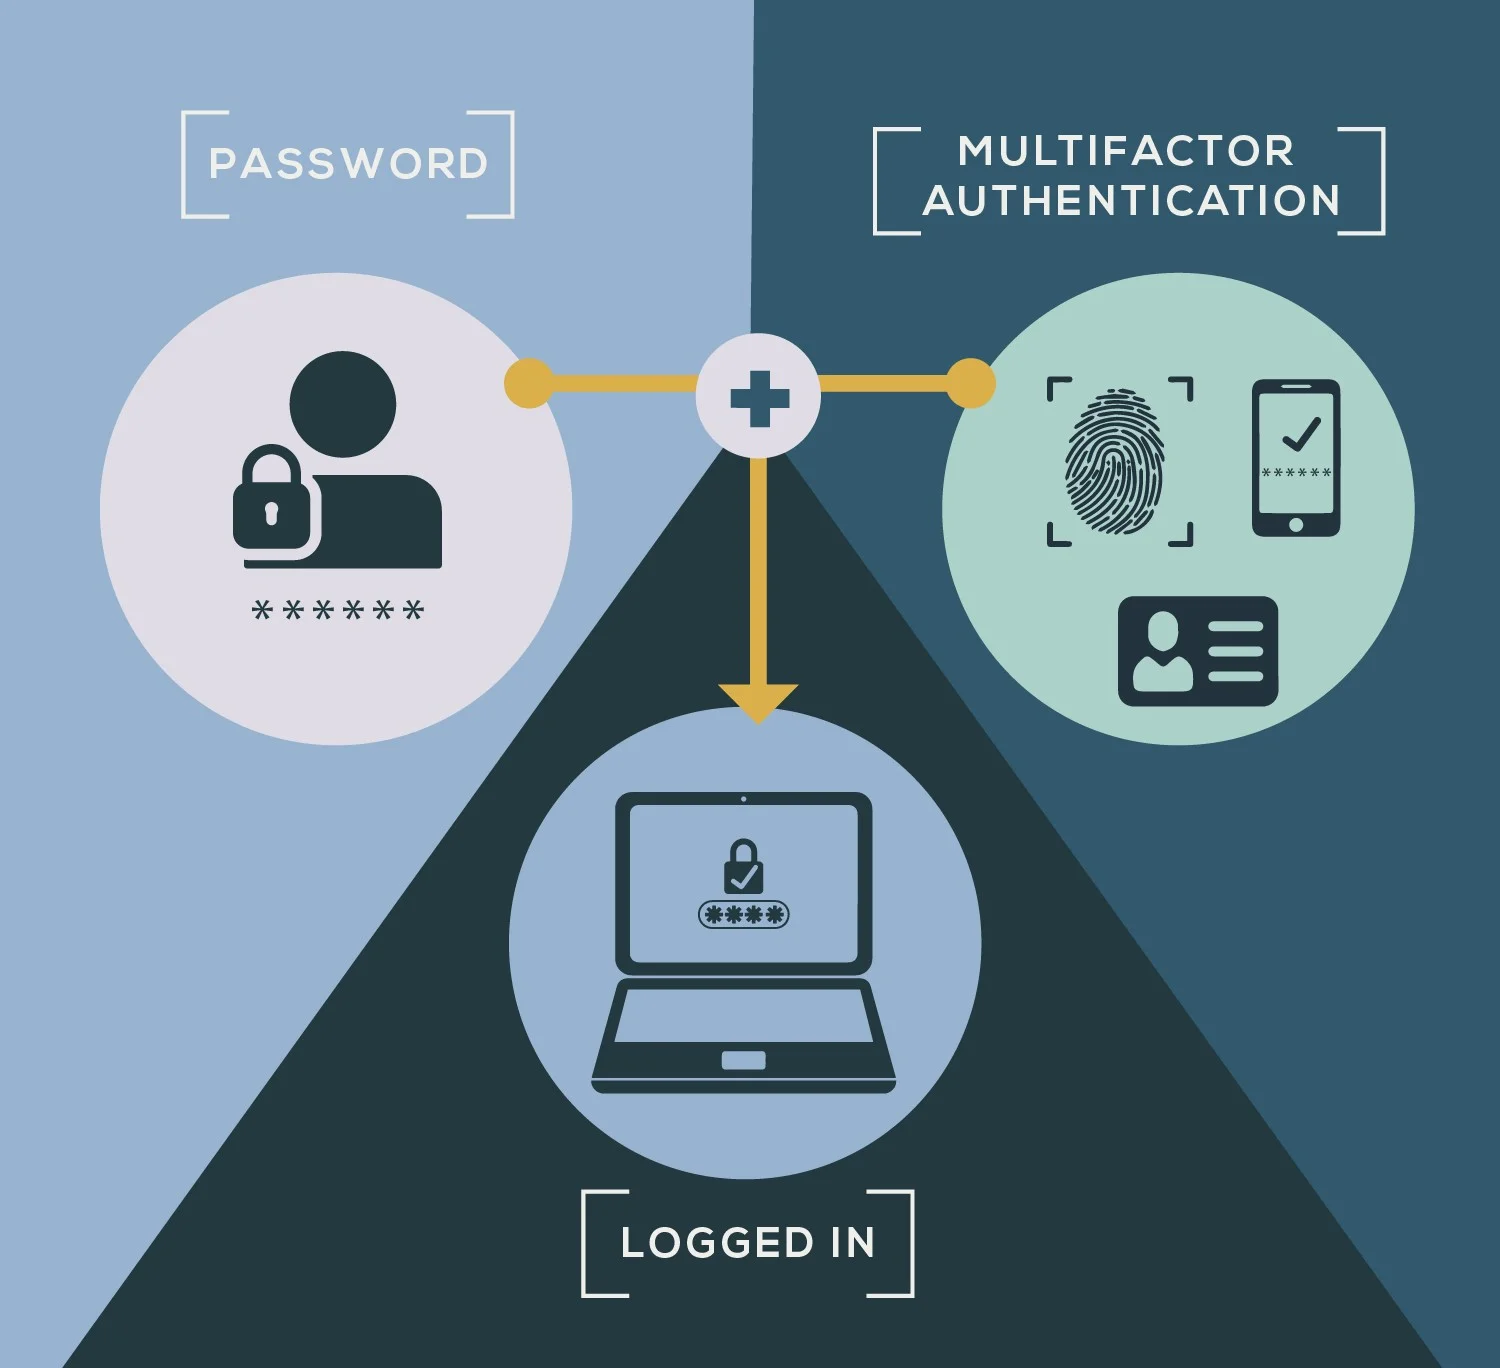 Multi Factor Authentication Can Be Performed Using Multi Factor Authenticators